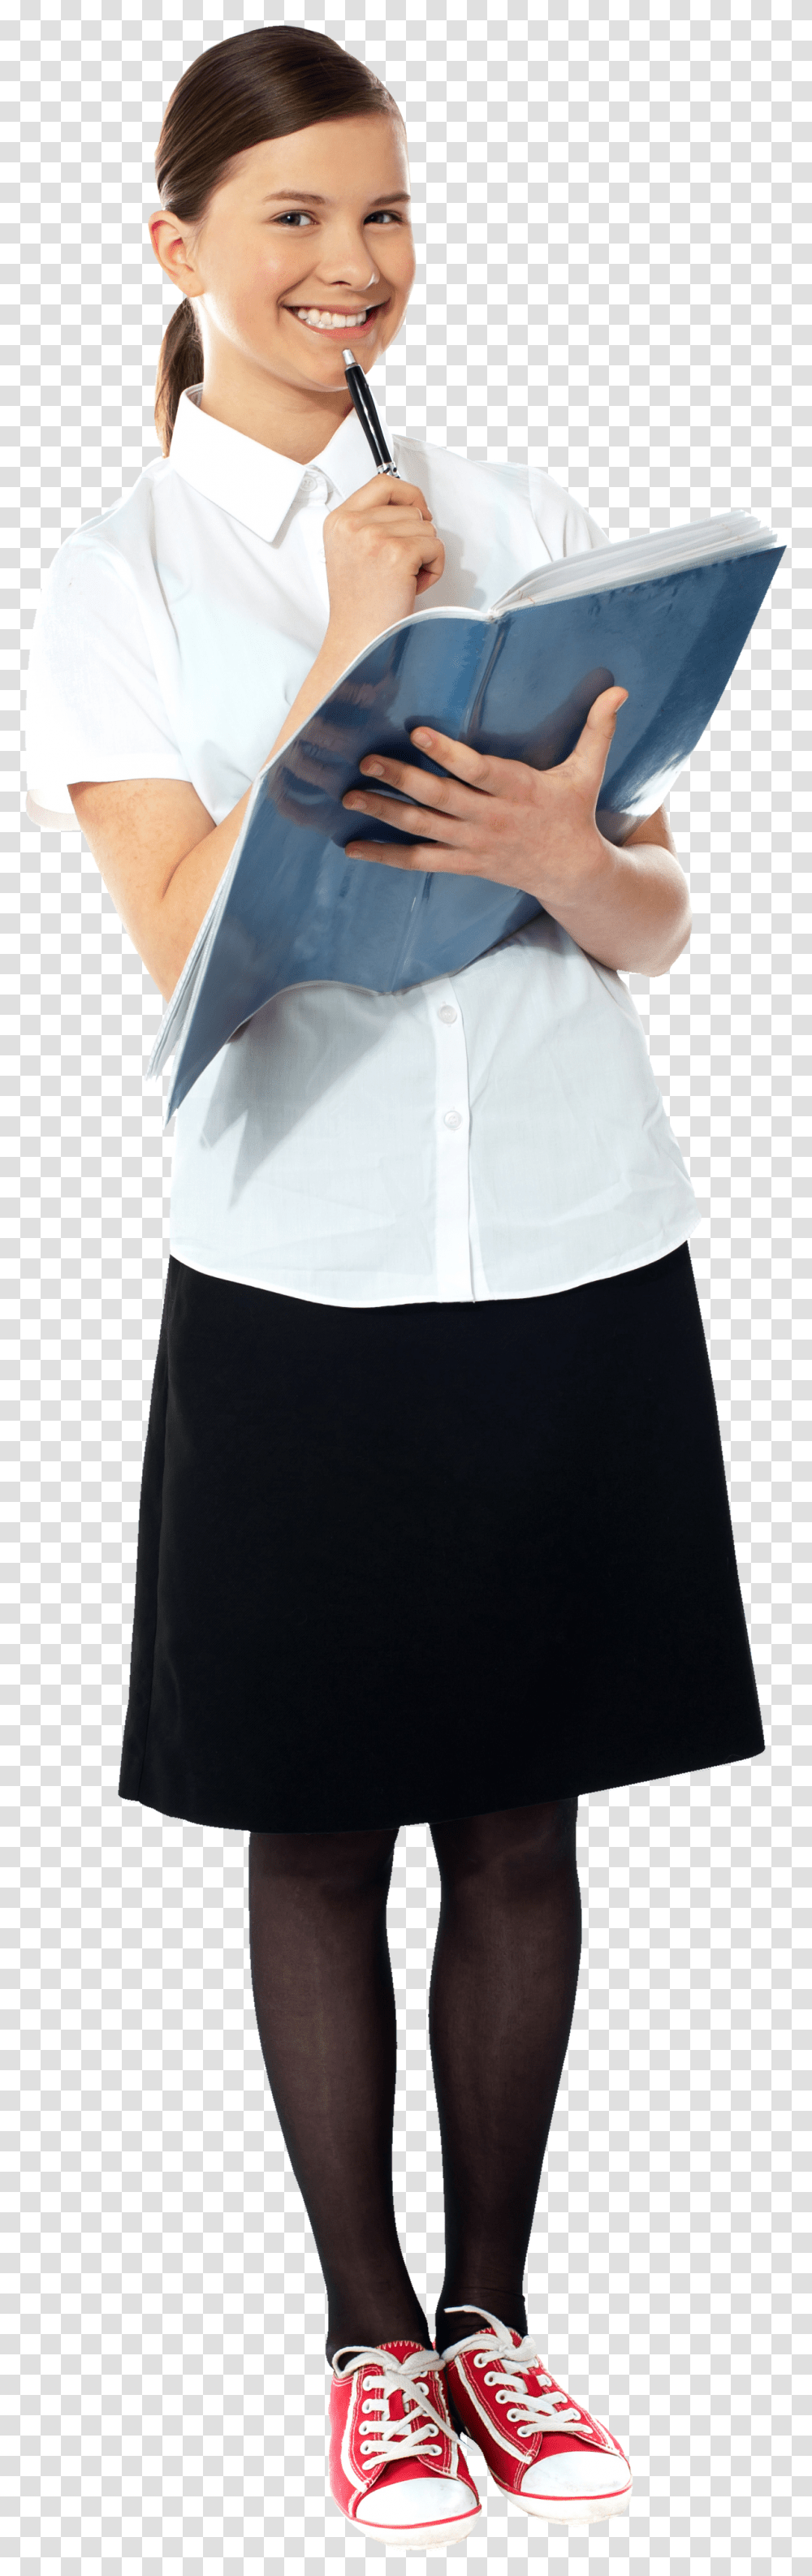 Royalty Free Image Student, Skirt, Person, Blouse Transparent Png